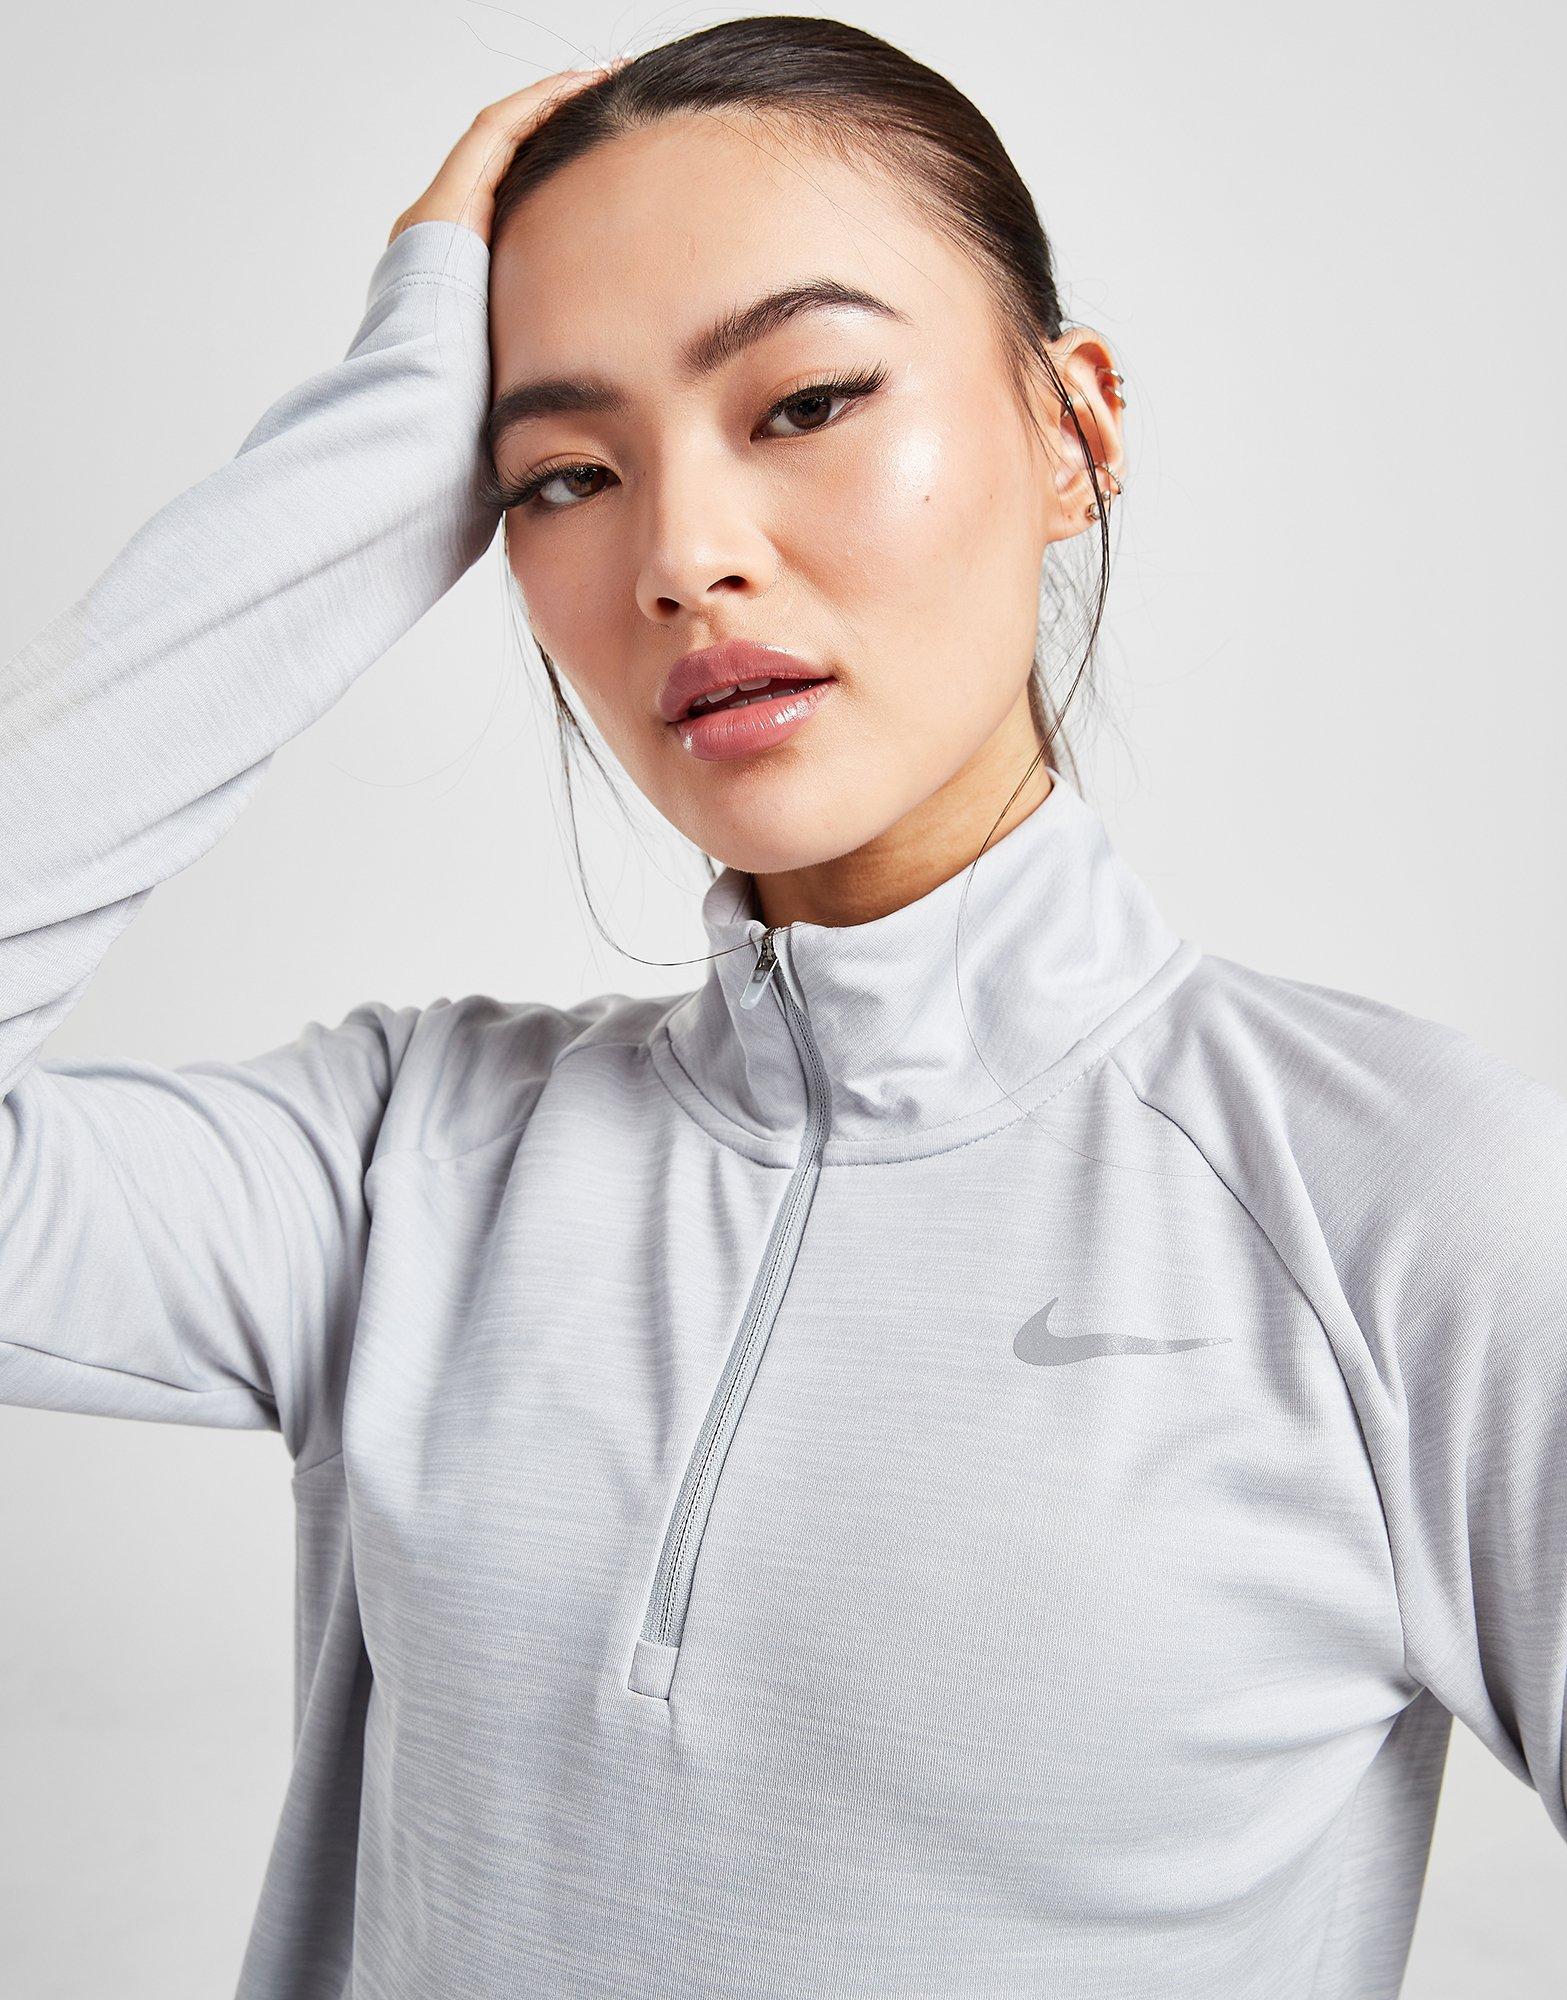 nike pacer top